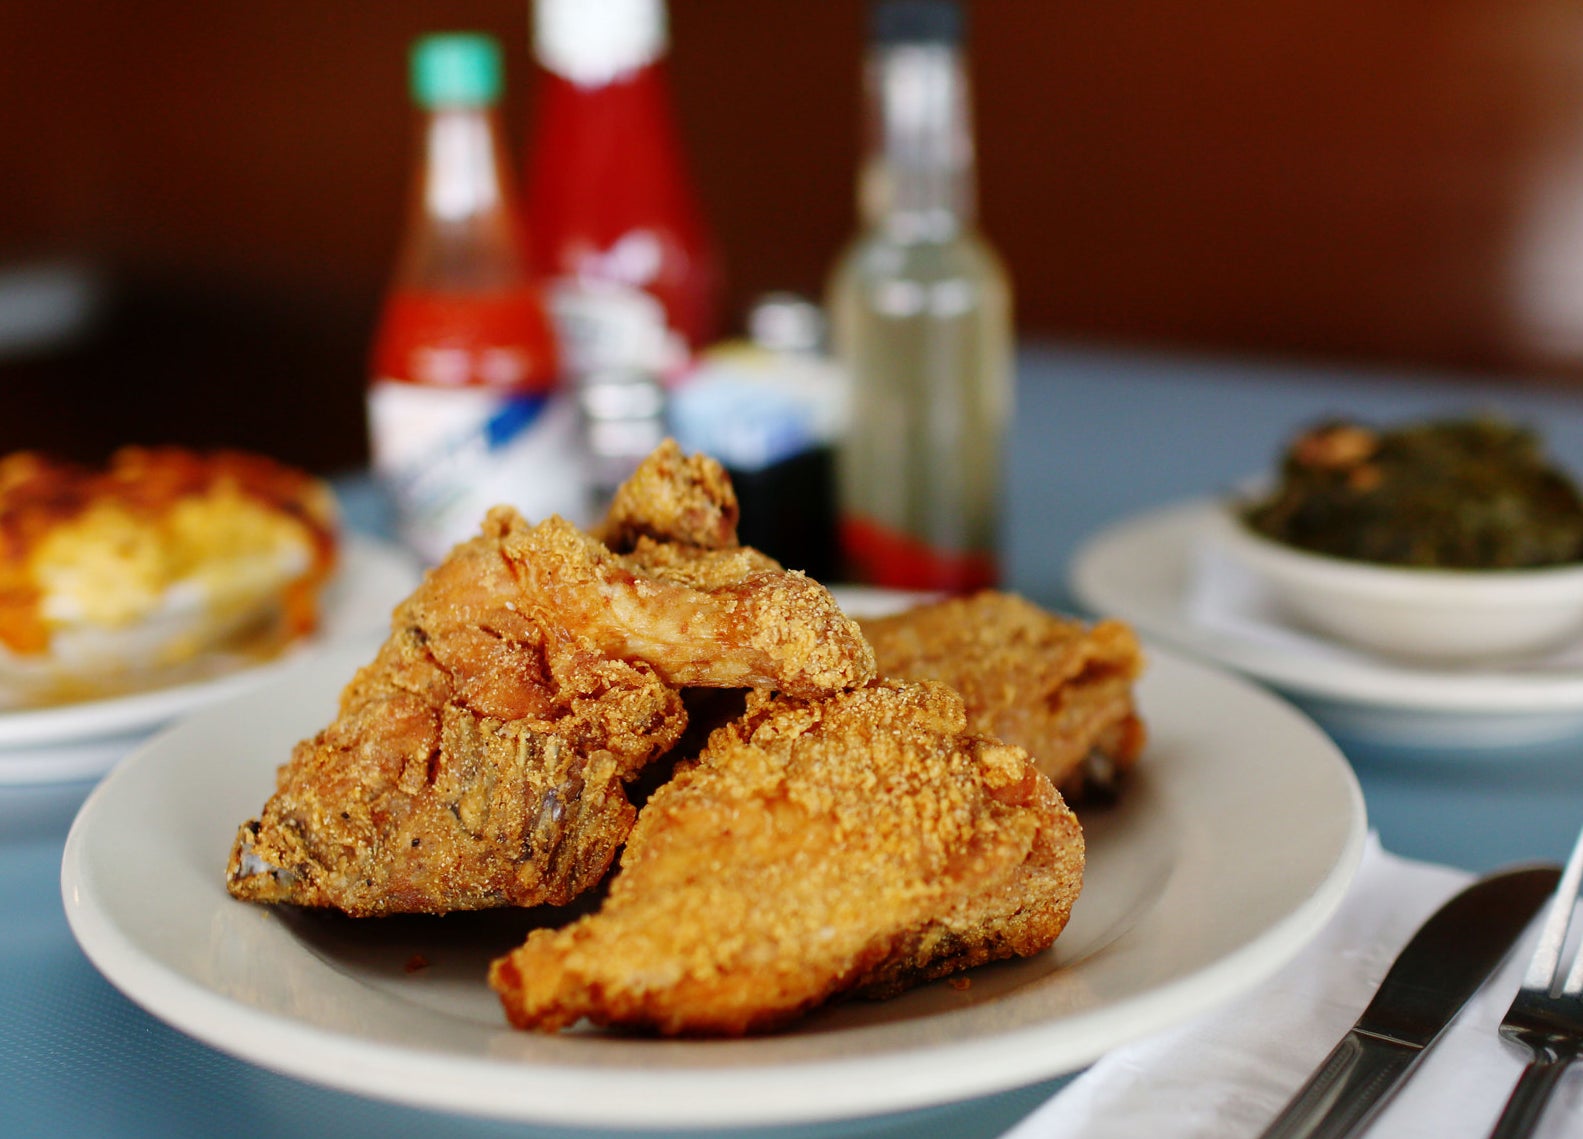 Southern-style fried chicken